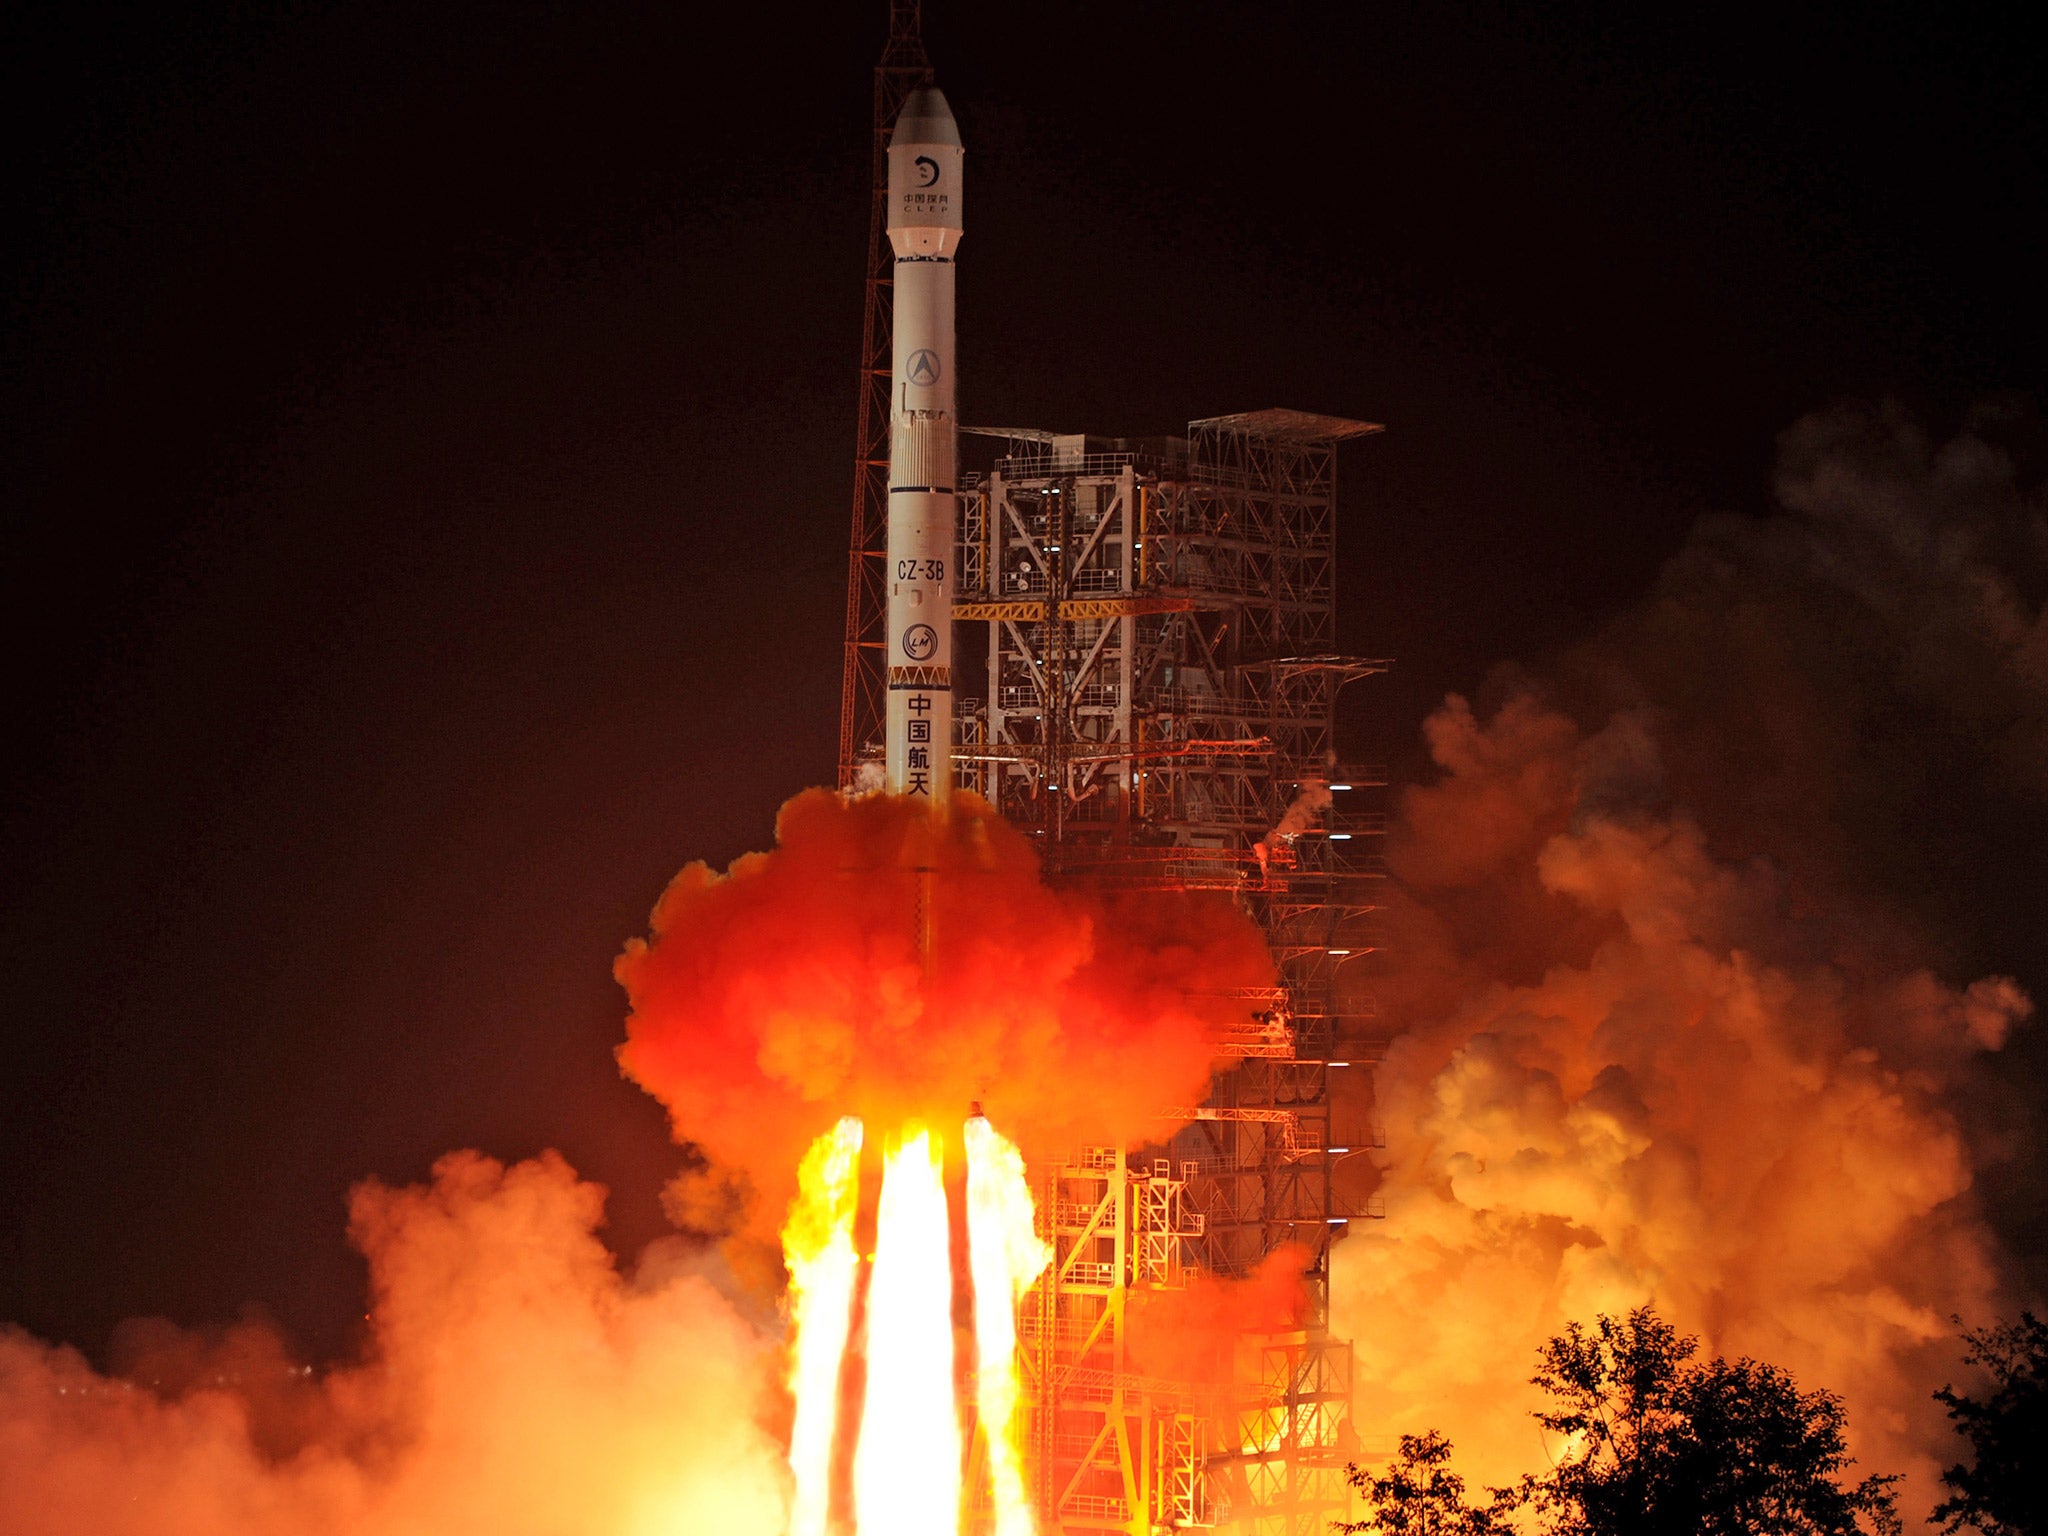 A Chinese rocket lifts off from the Xichang Satellite Launch Center in 2013. China insists that its space programme has peaceful purposes